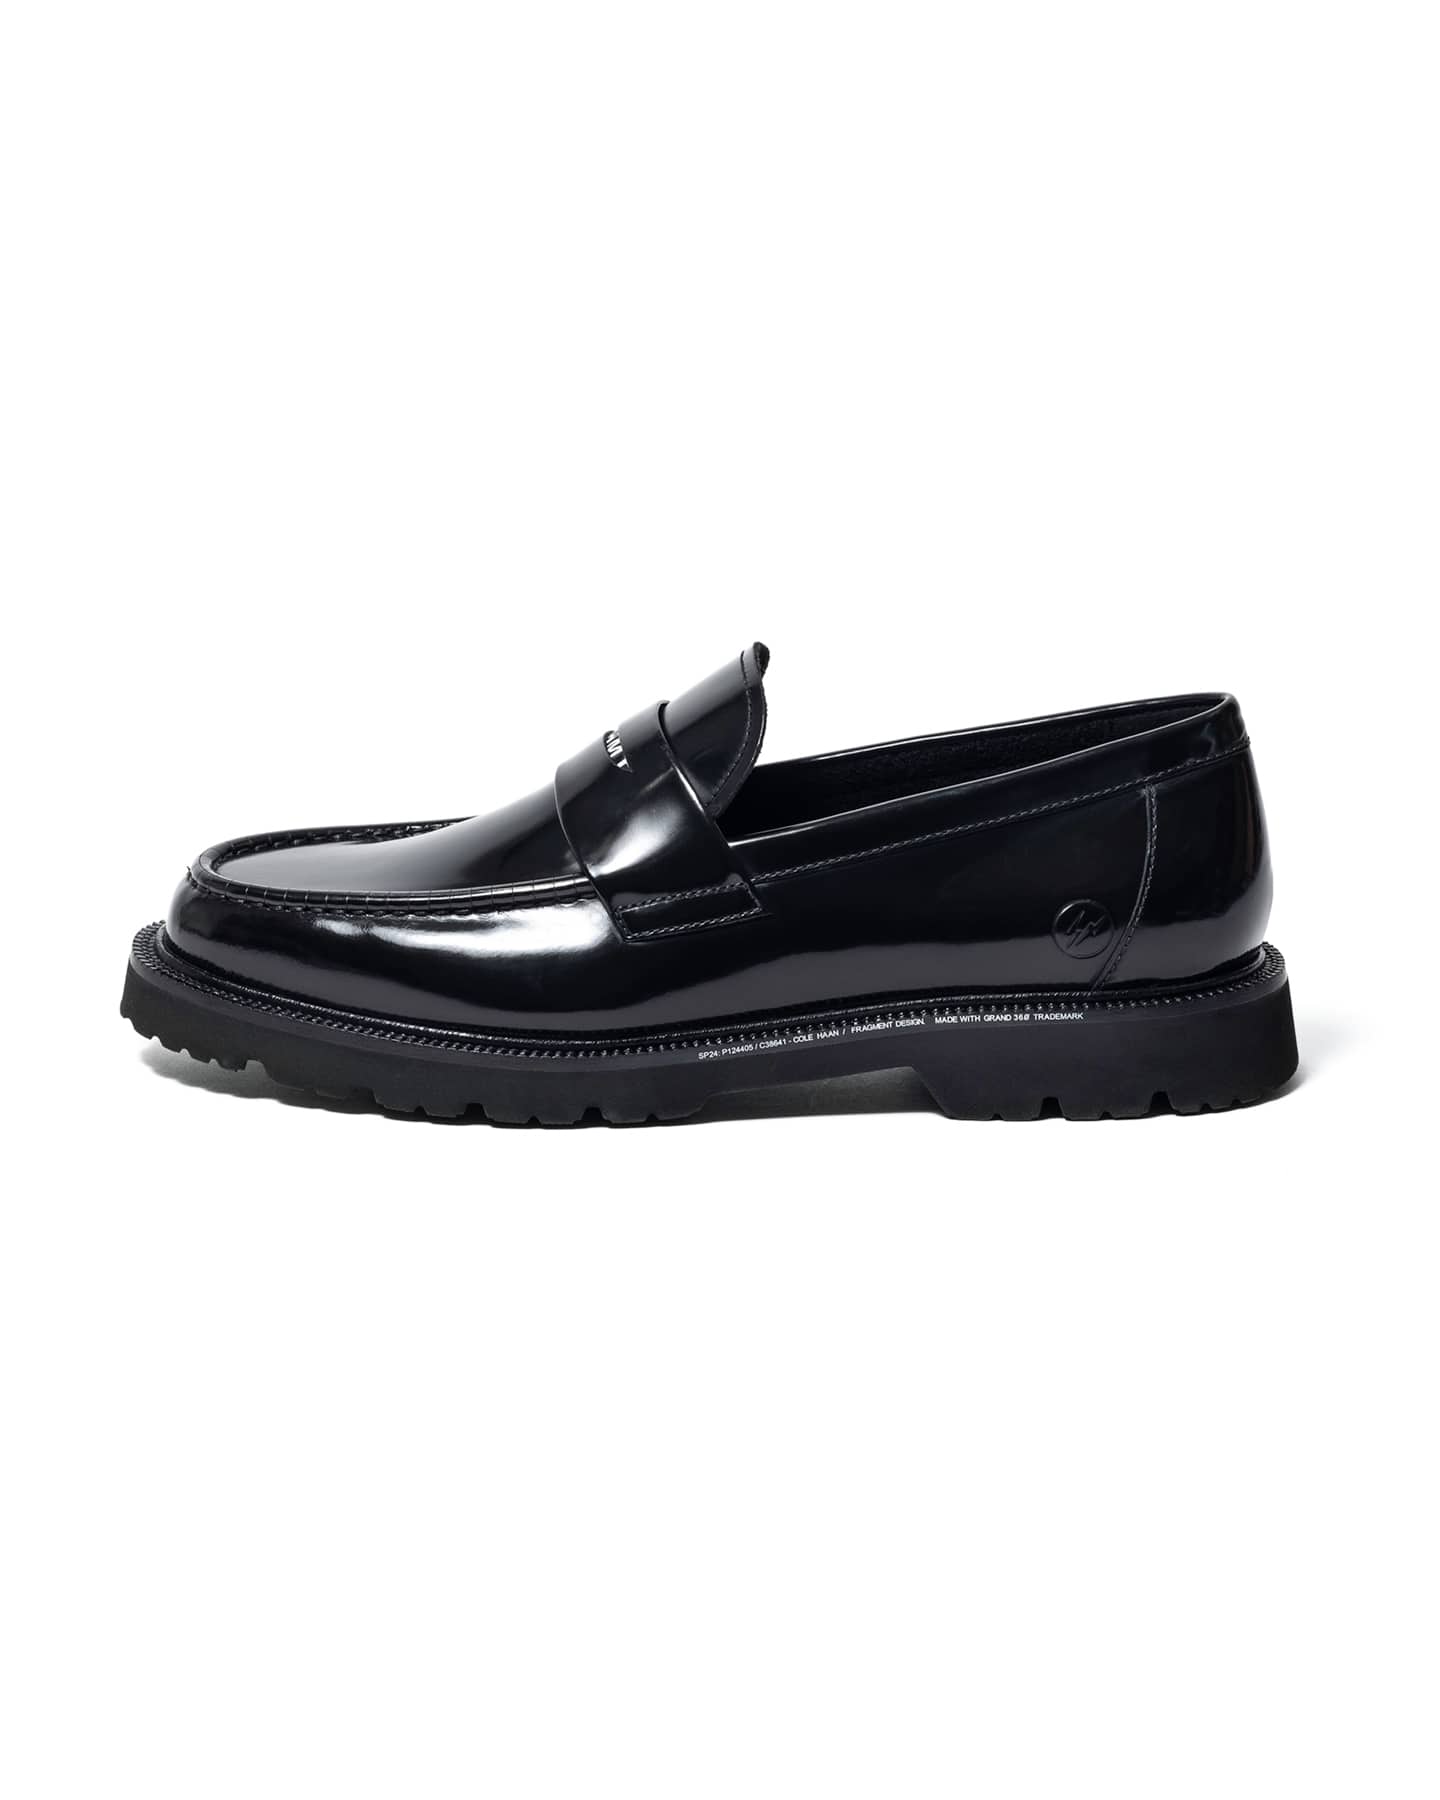 COLE HAAN FRAGMENT DESIGN PENNY LOAFER納品書等の同封もできかねます